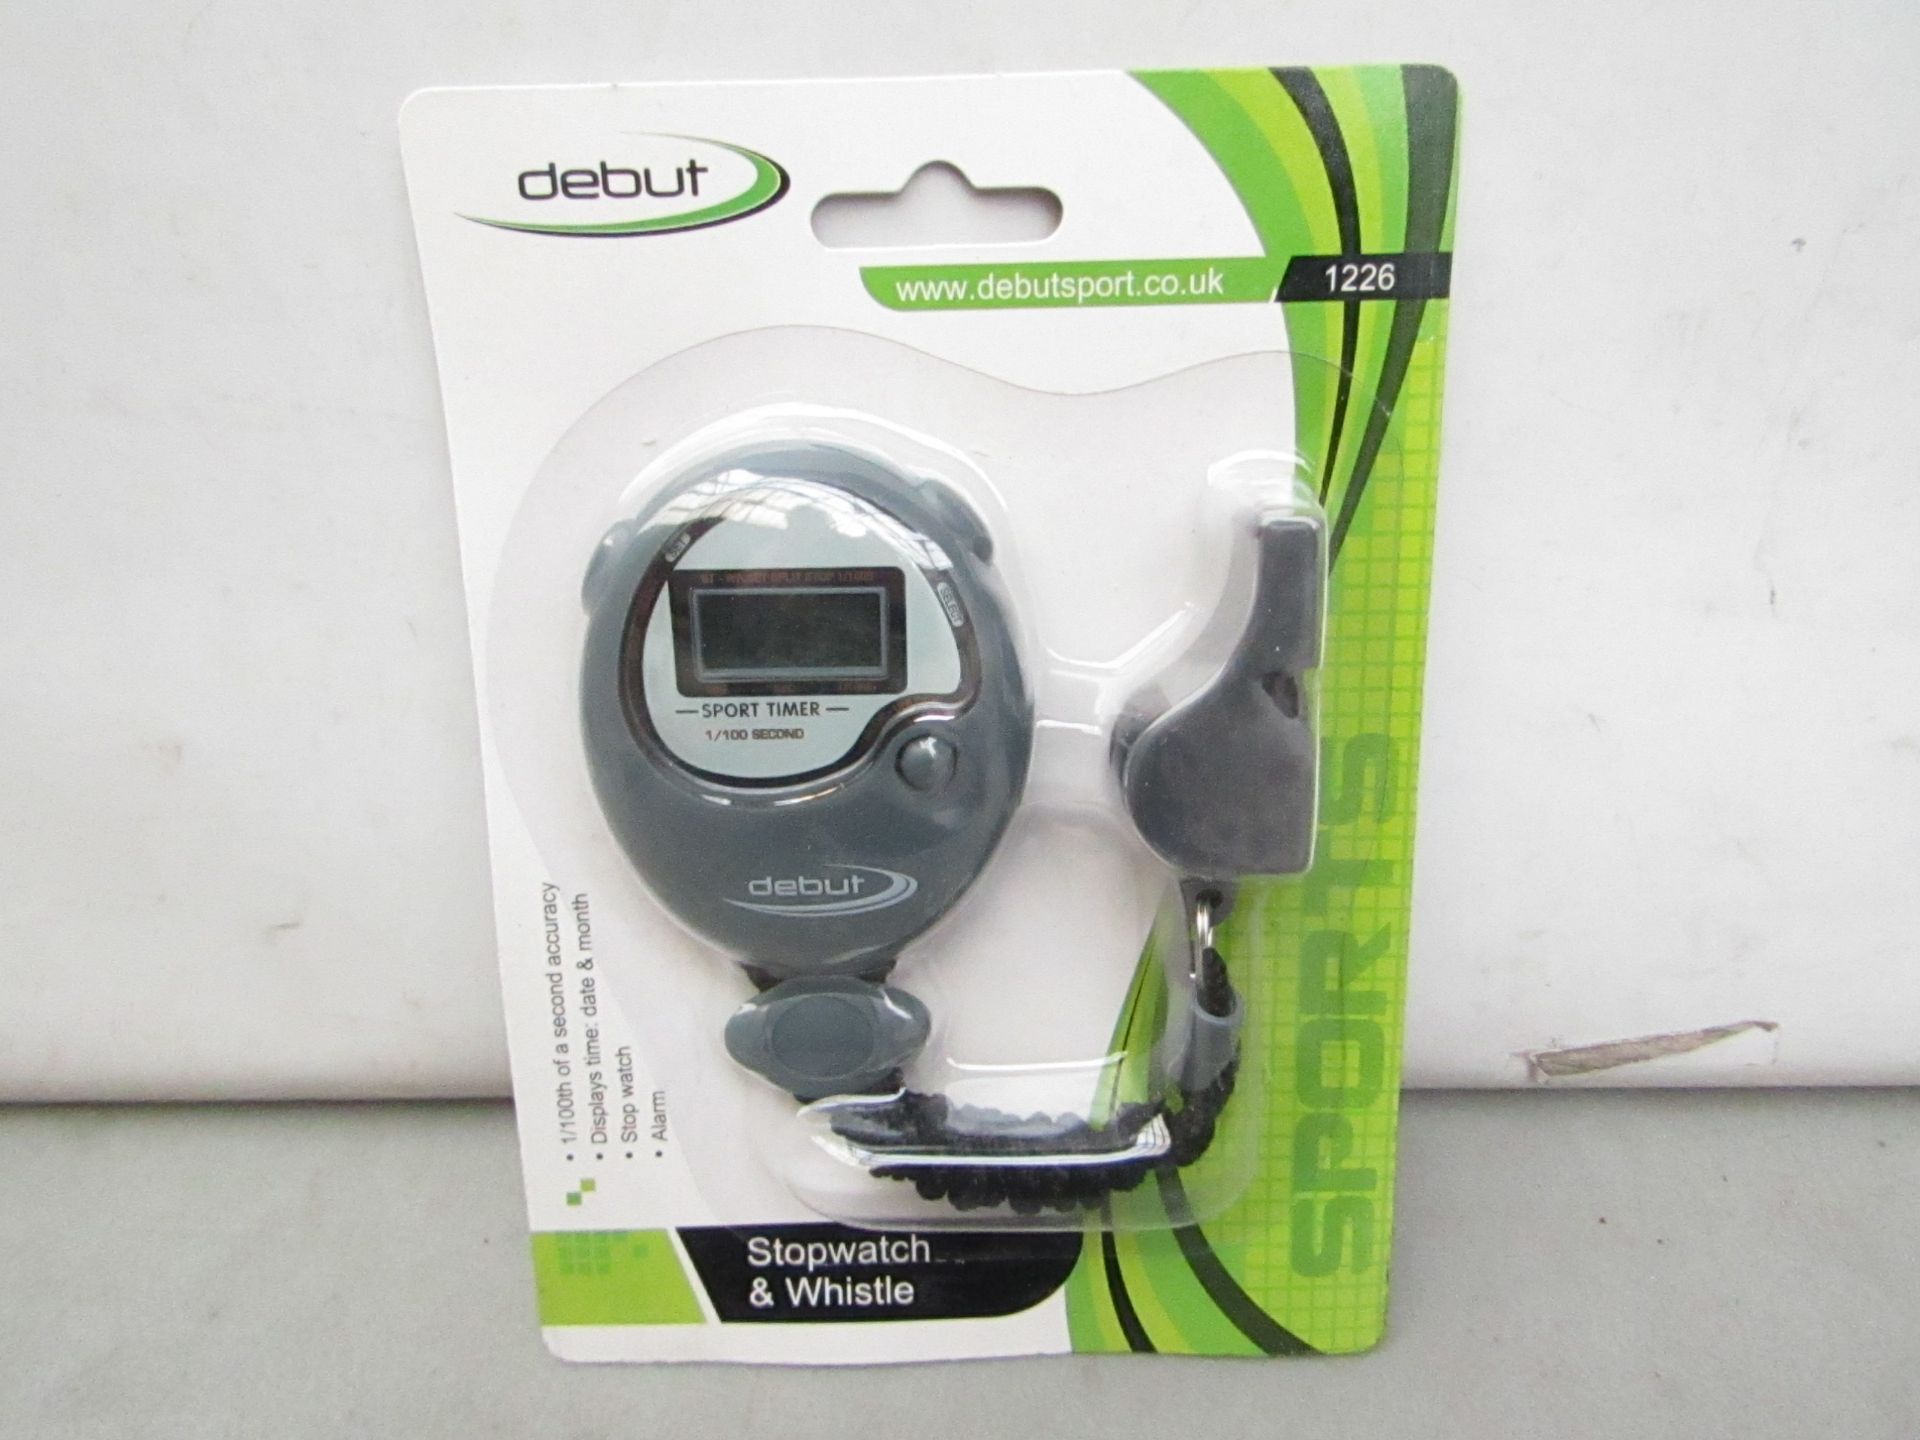 1 X Debut Sport Stopwatch & Whistle new in packaging